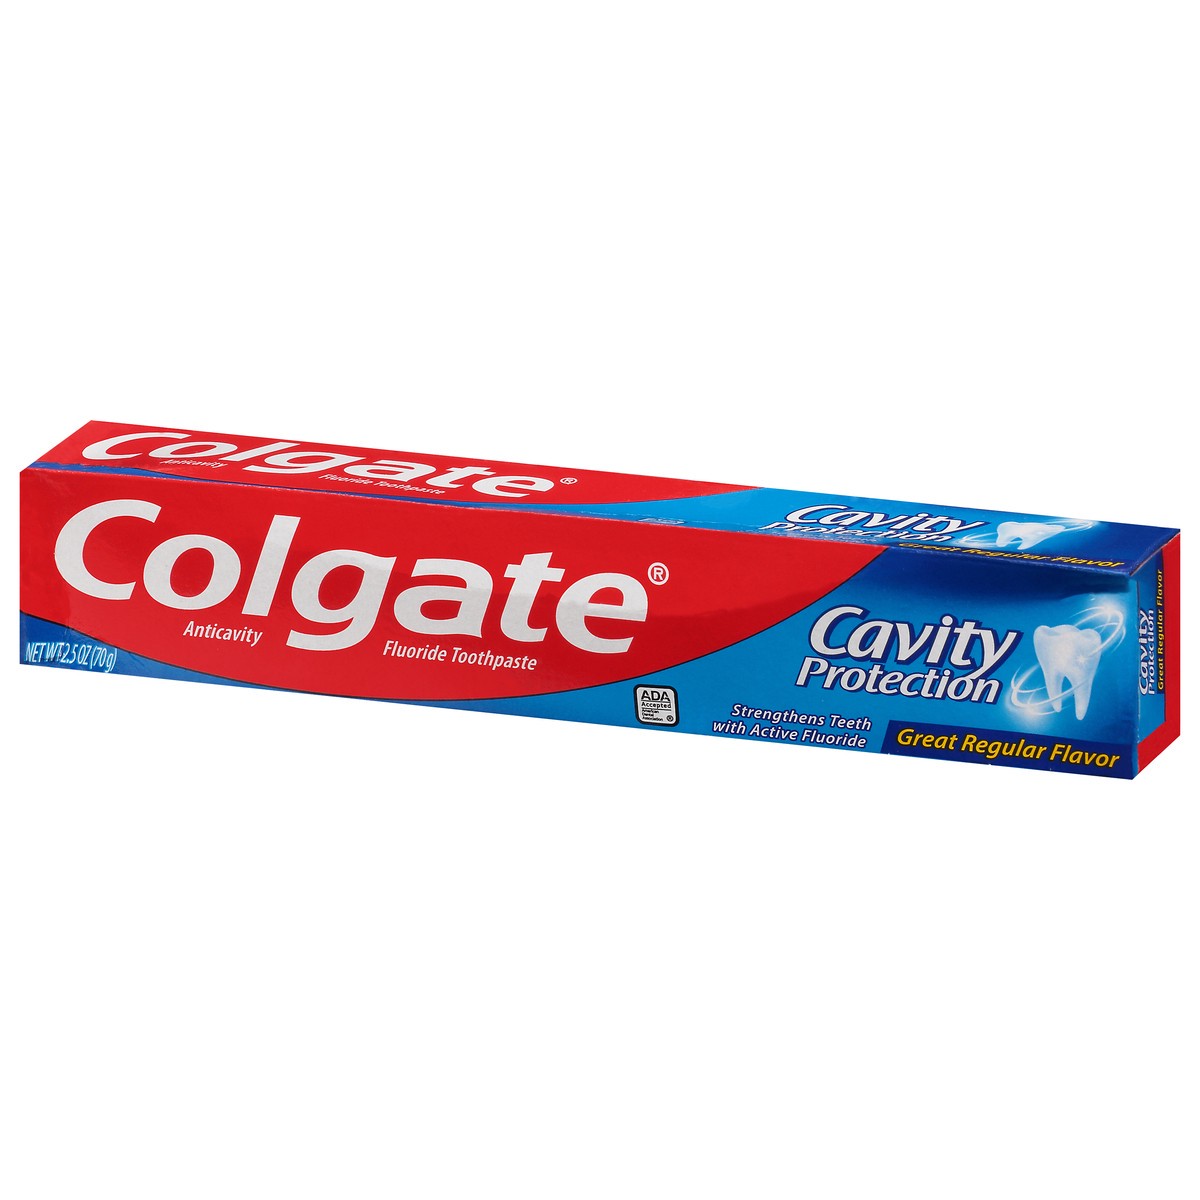 slide 5 of 9, Colgate Cavity Protection Toothpaste with Fluoride, Great Regular Flavor - 2.5 Ounce, 2.5 oz